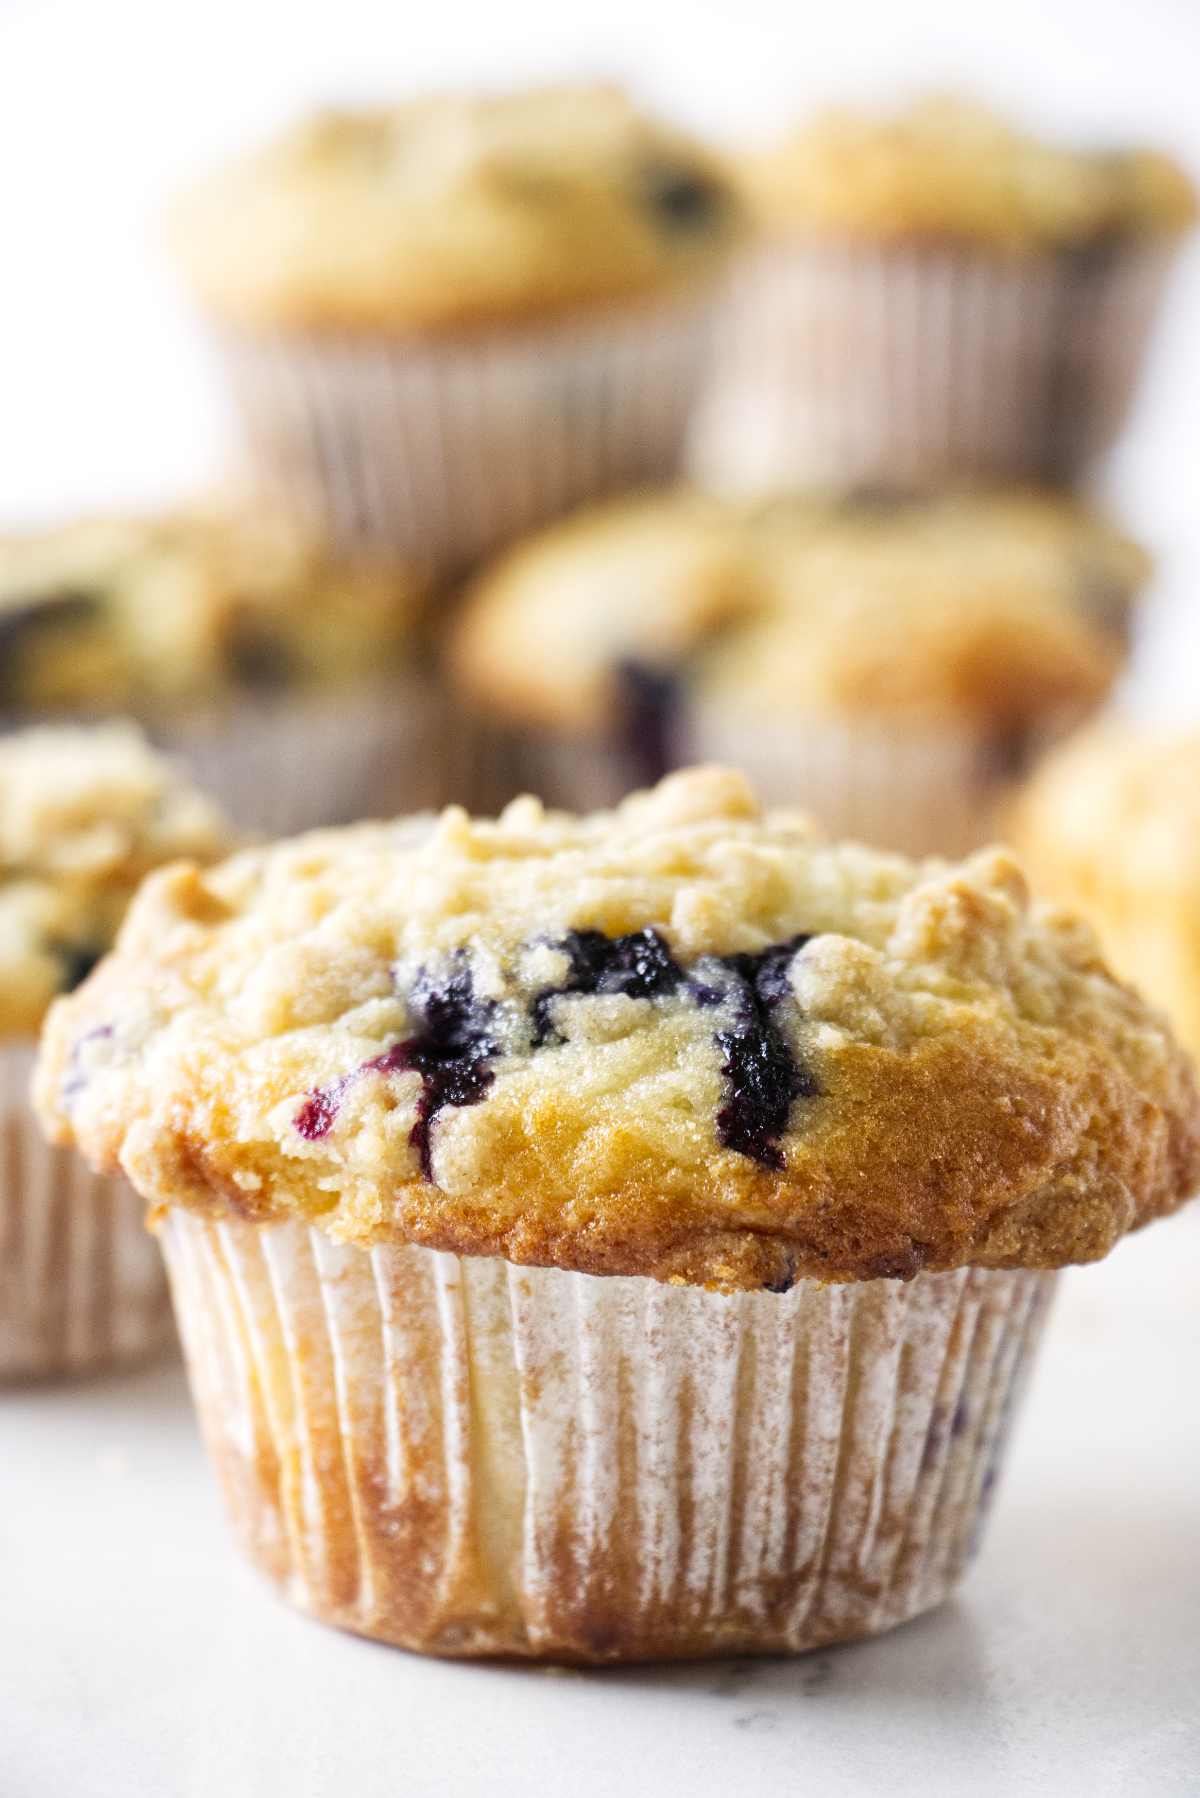 Sourdough blueberry muffin with a stack of muffins in the background.